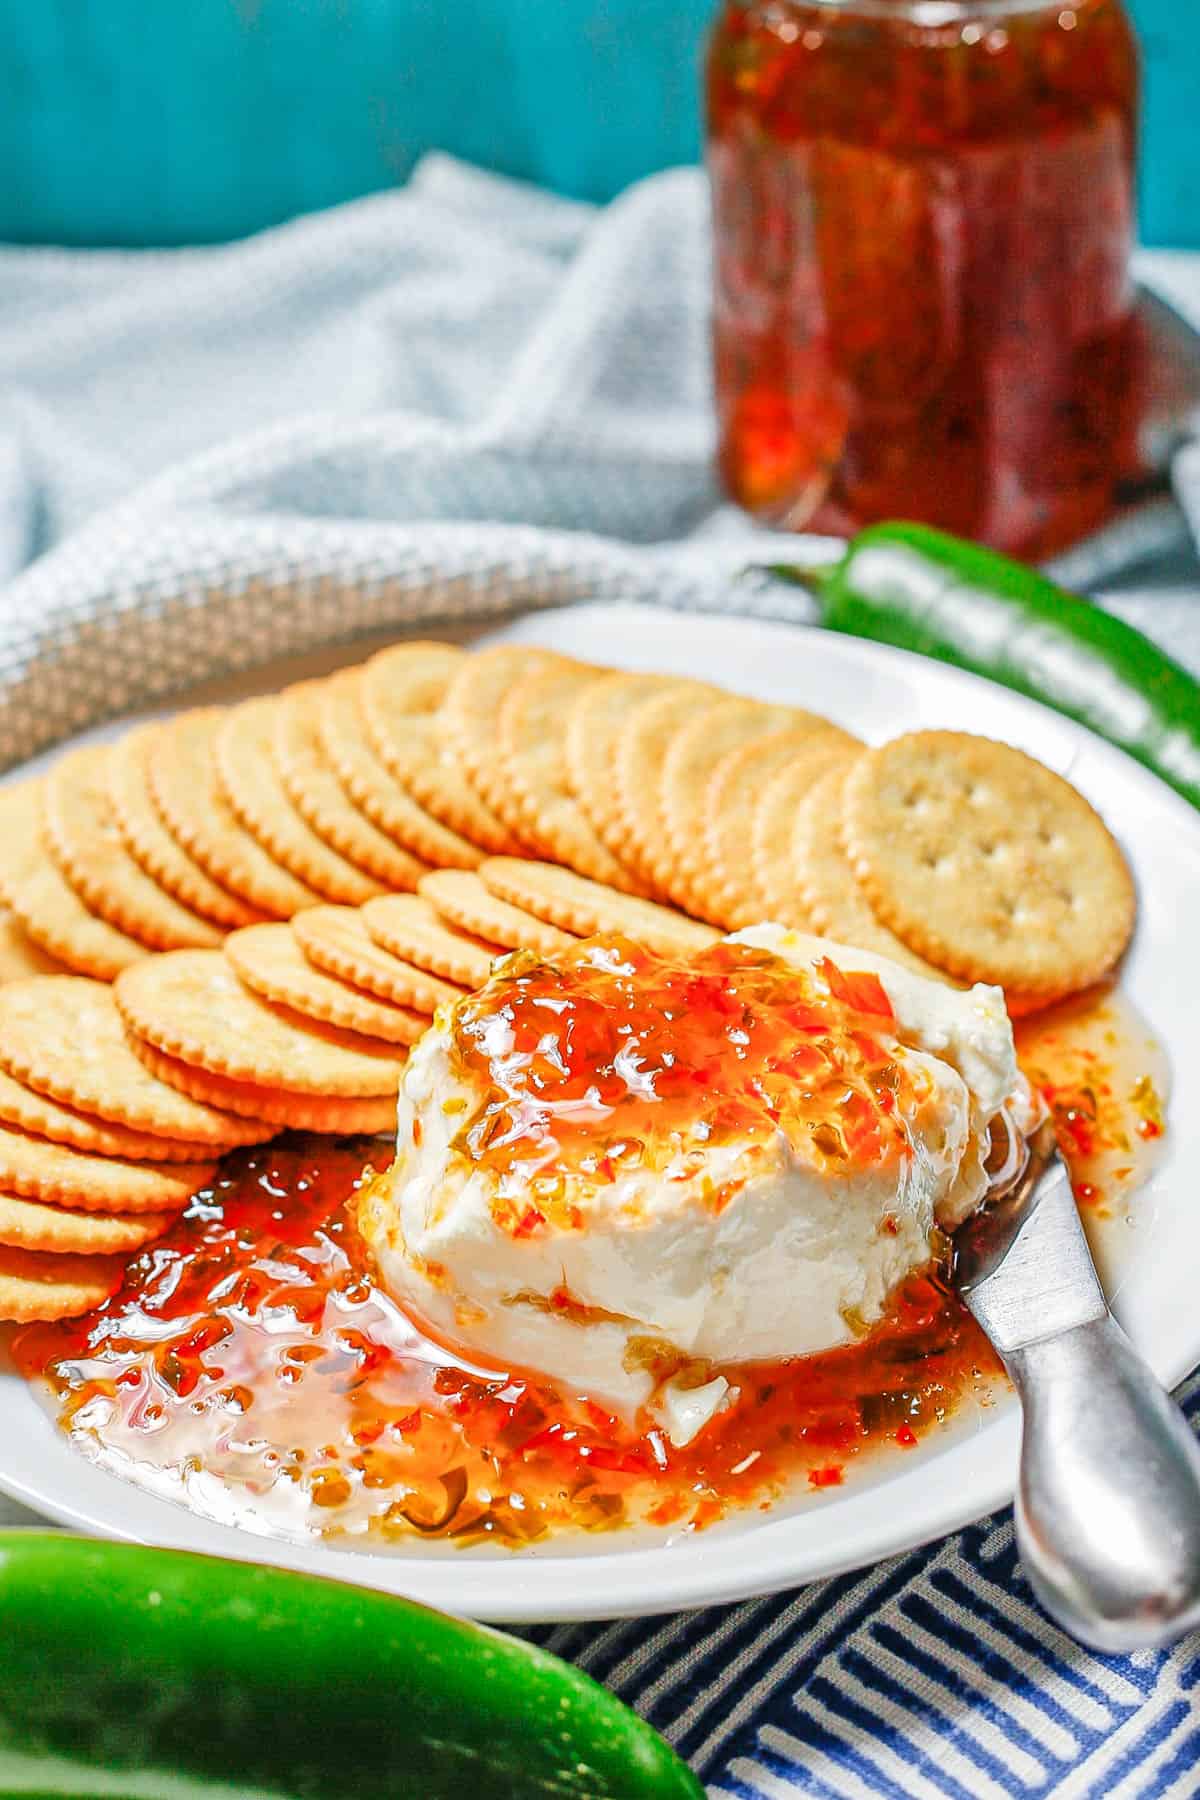 Cream cheese and pepper jelly served on a white round plate with crackers.